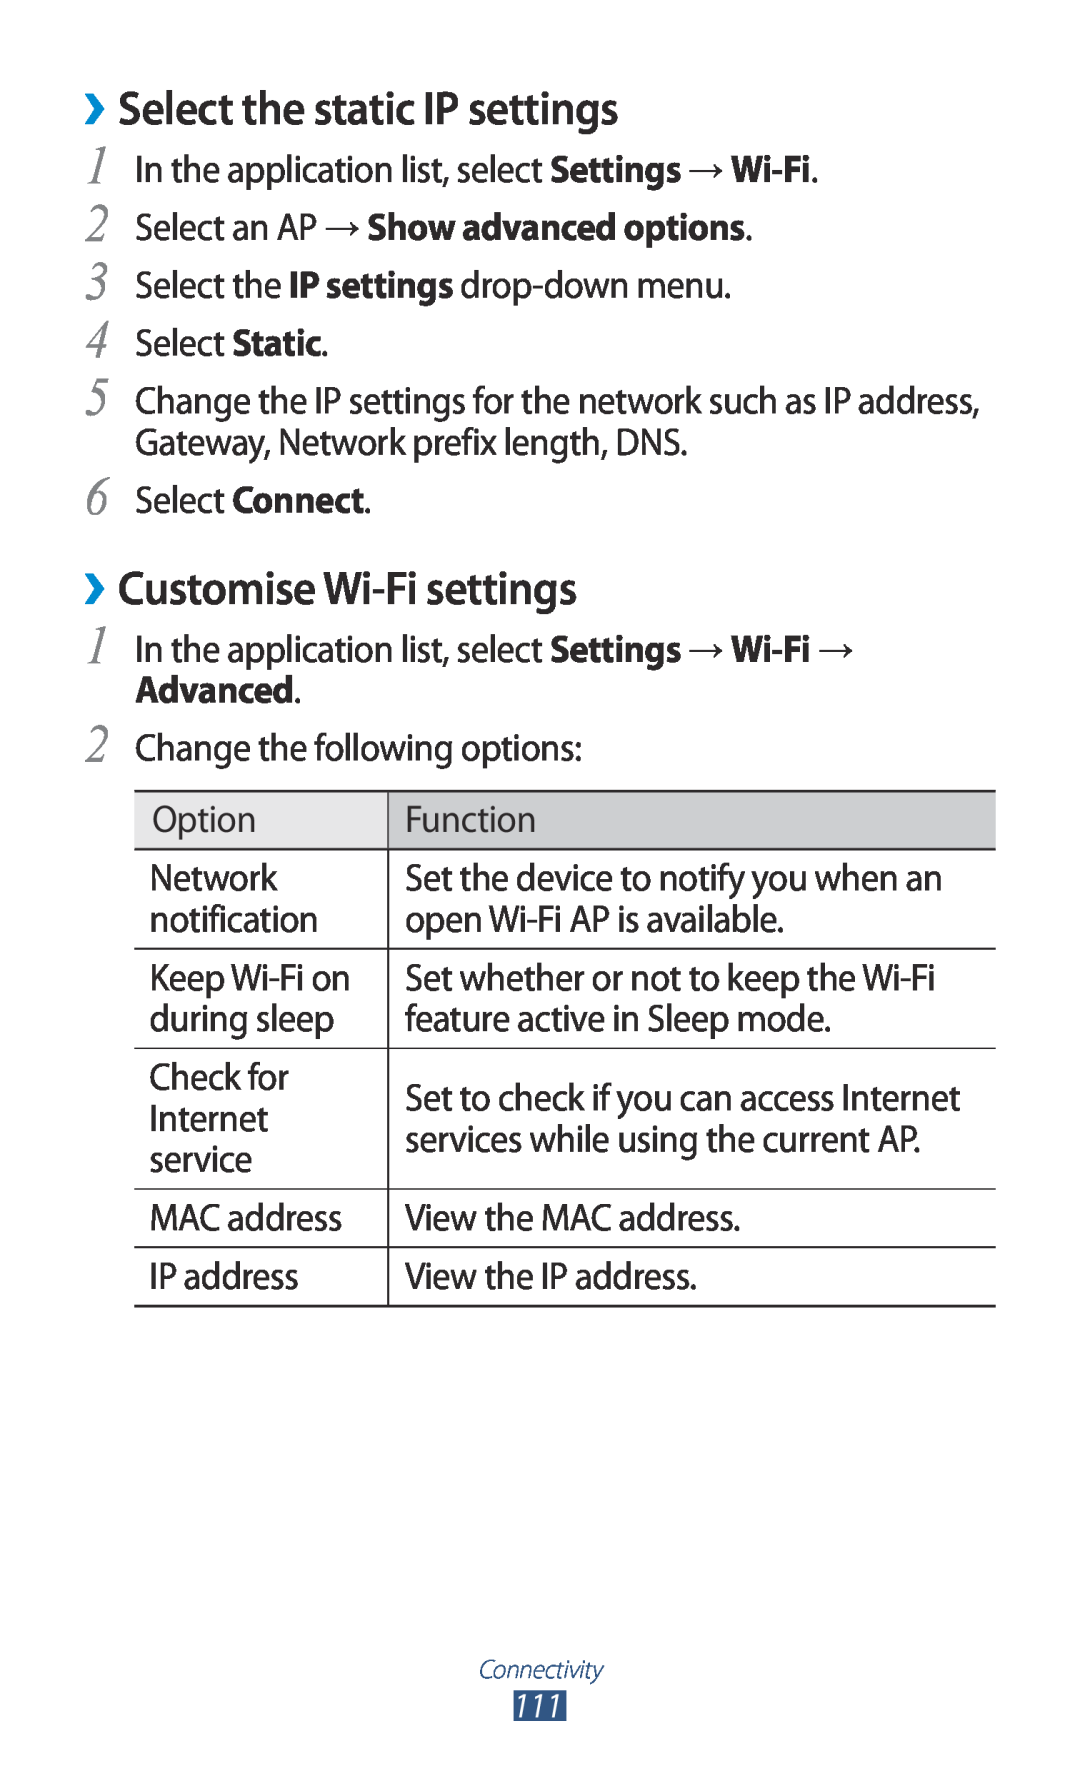 Samsung GT-S7560ZKAXXV ››Select the static IP settings, ››Customise Wi-Fi settings, Select an AP → Show advanced options 